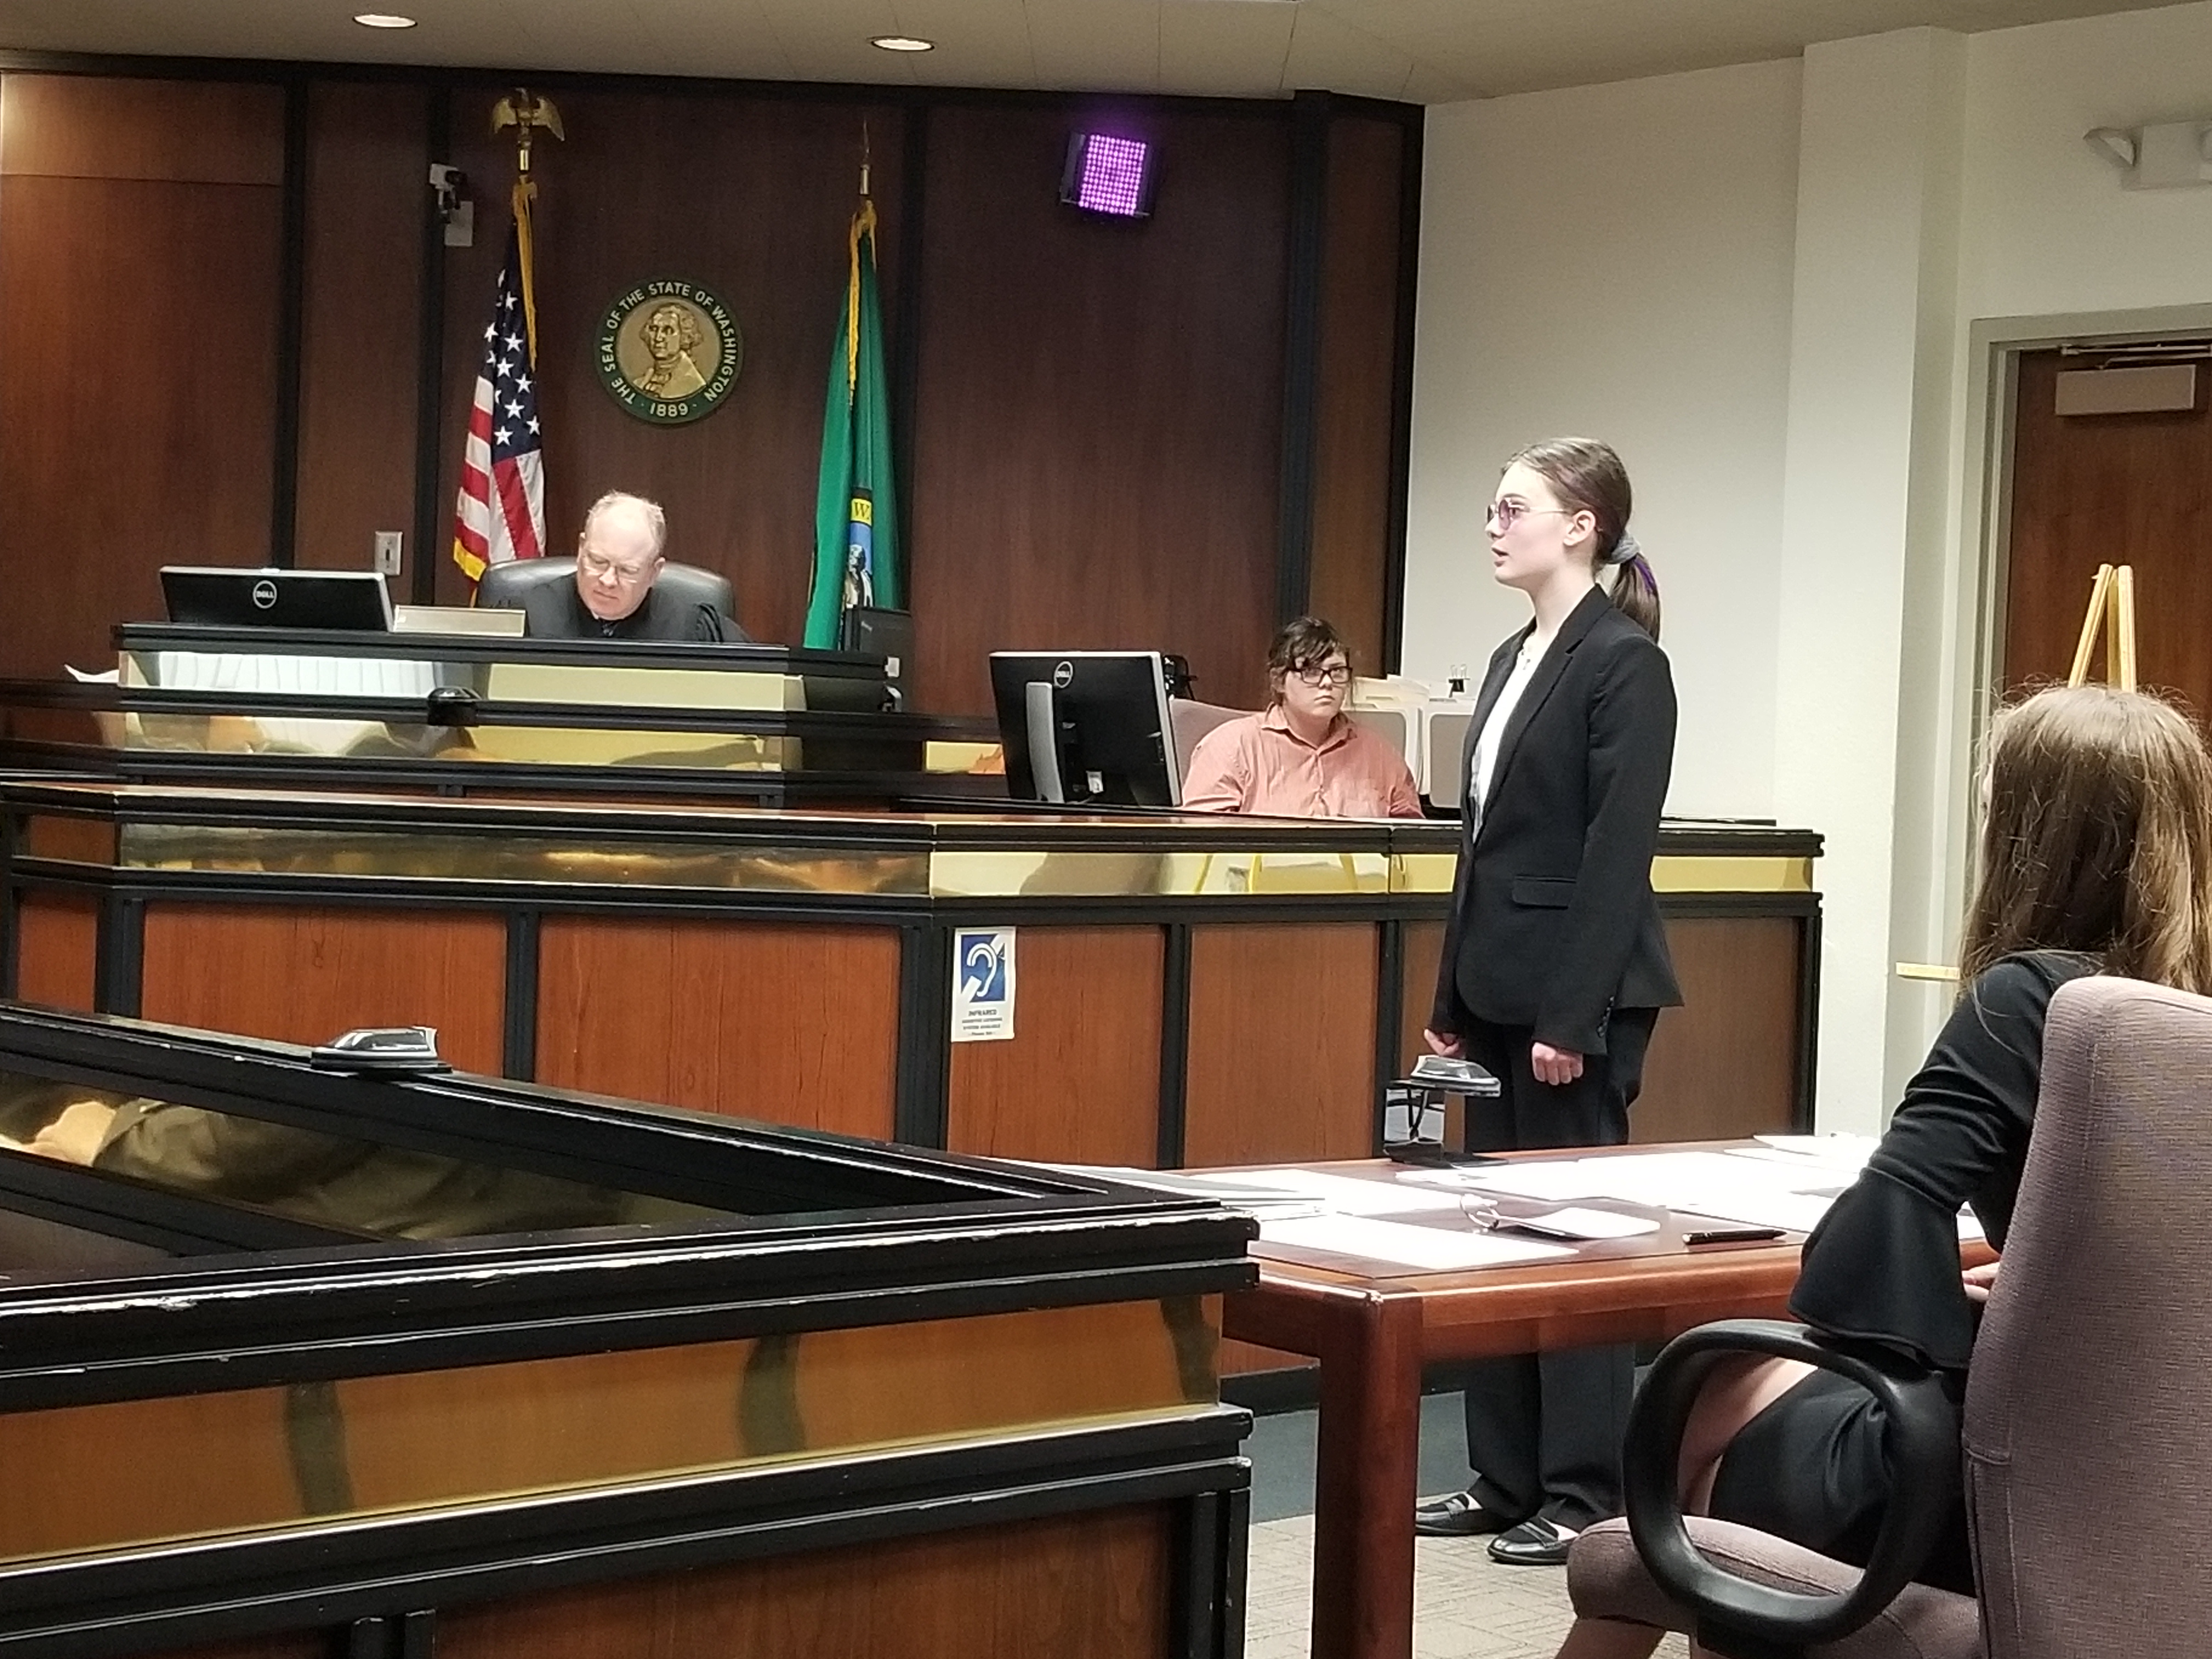 A photo of a group of students in a mock trial